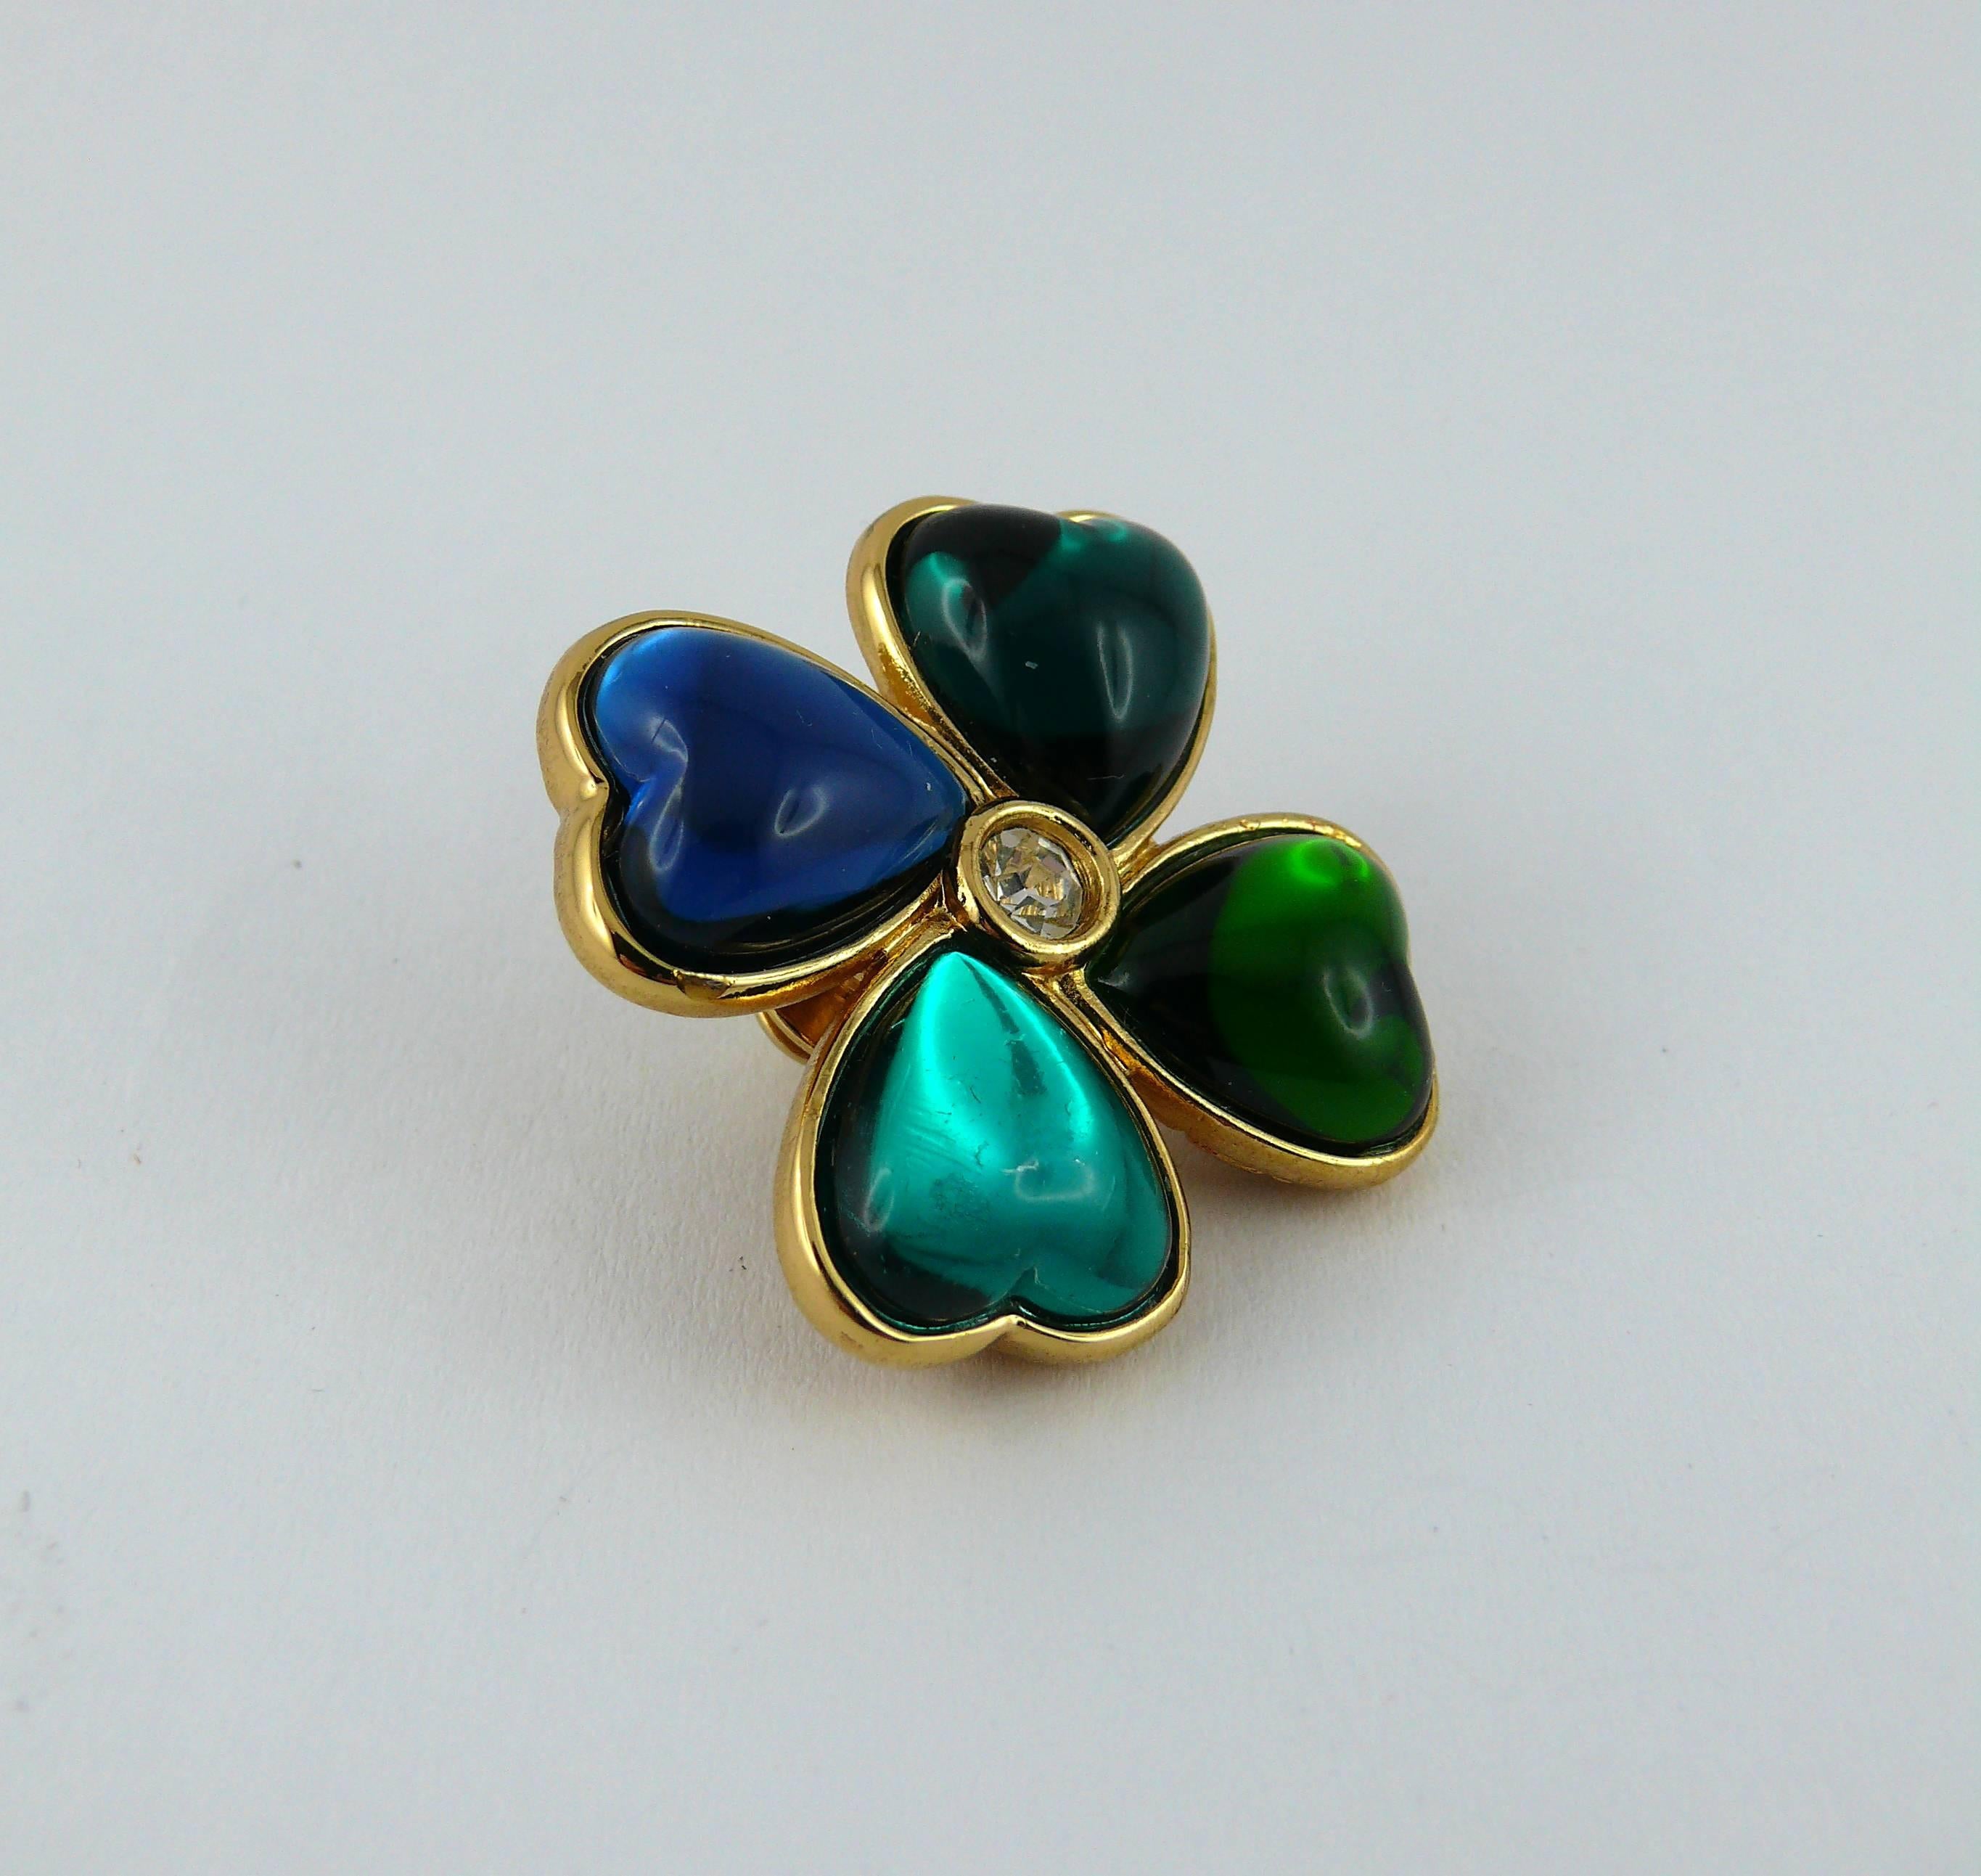 YVES SAINT LAURENT vintage clover brooch featuring heart petals.

This brooch consists of blue and green shades resin petals in a gold tone setting. White rhinestone embellishement.

Pin closure.

Marked YSL Made in France.

JEWELRY